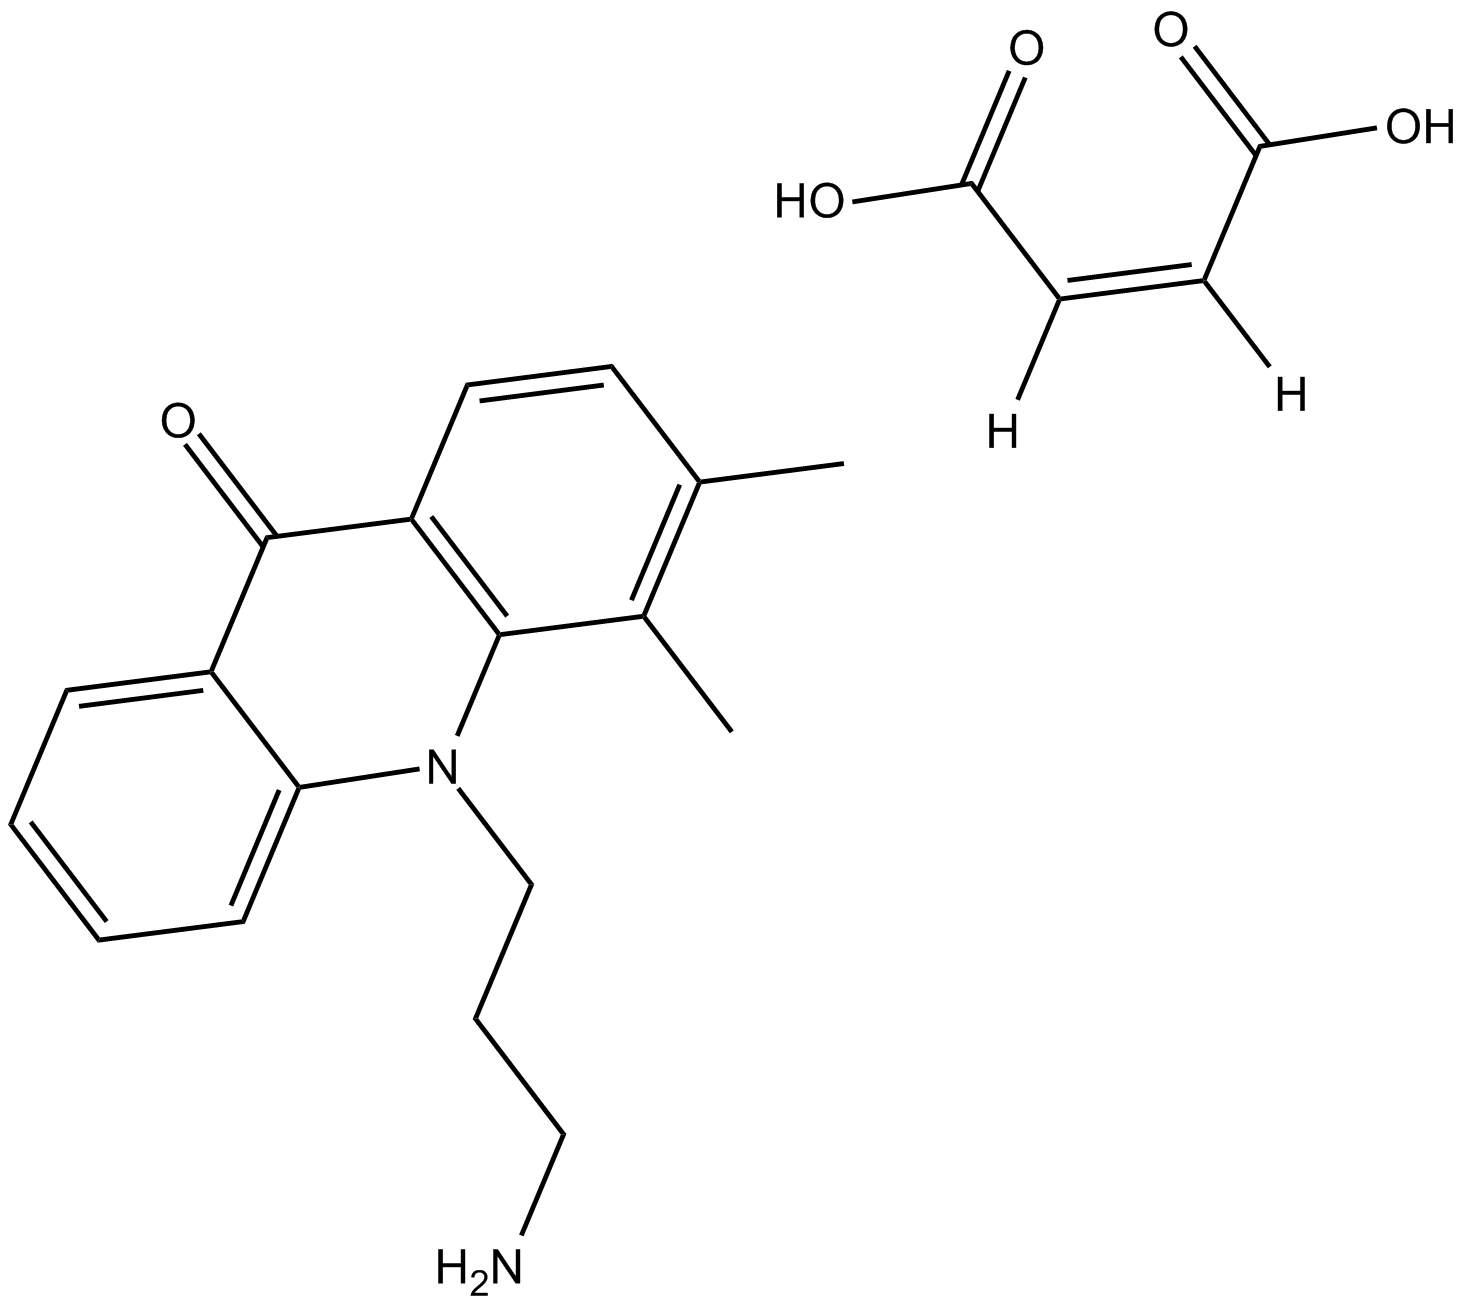 ER 27319 maleate  Chemical Structure